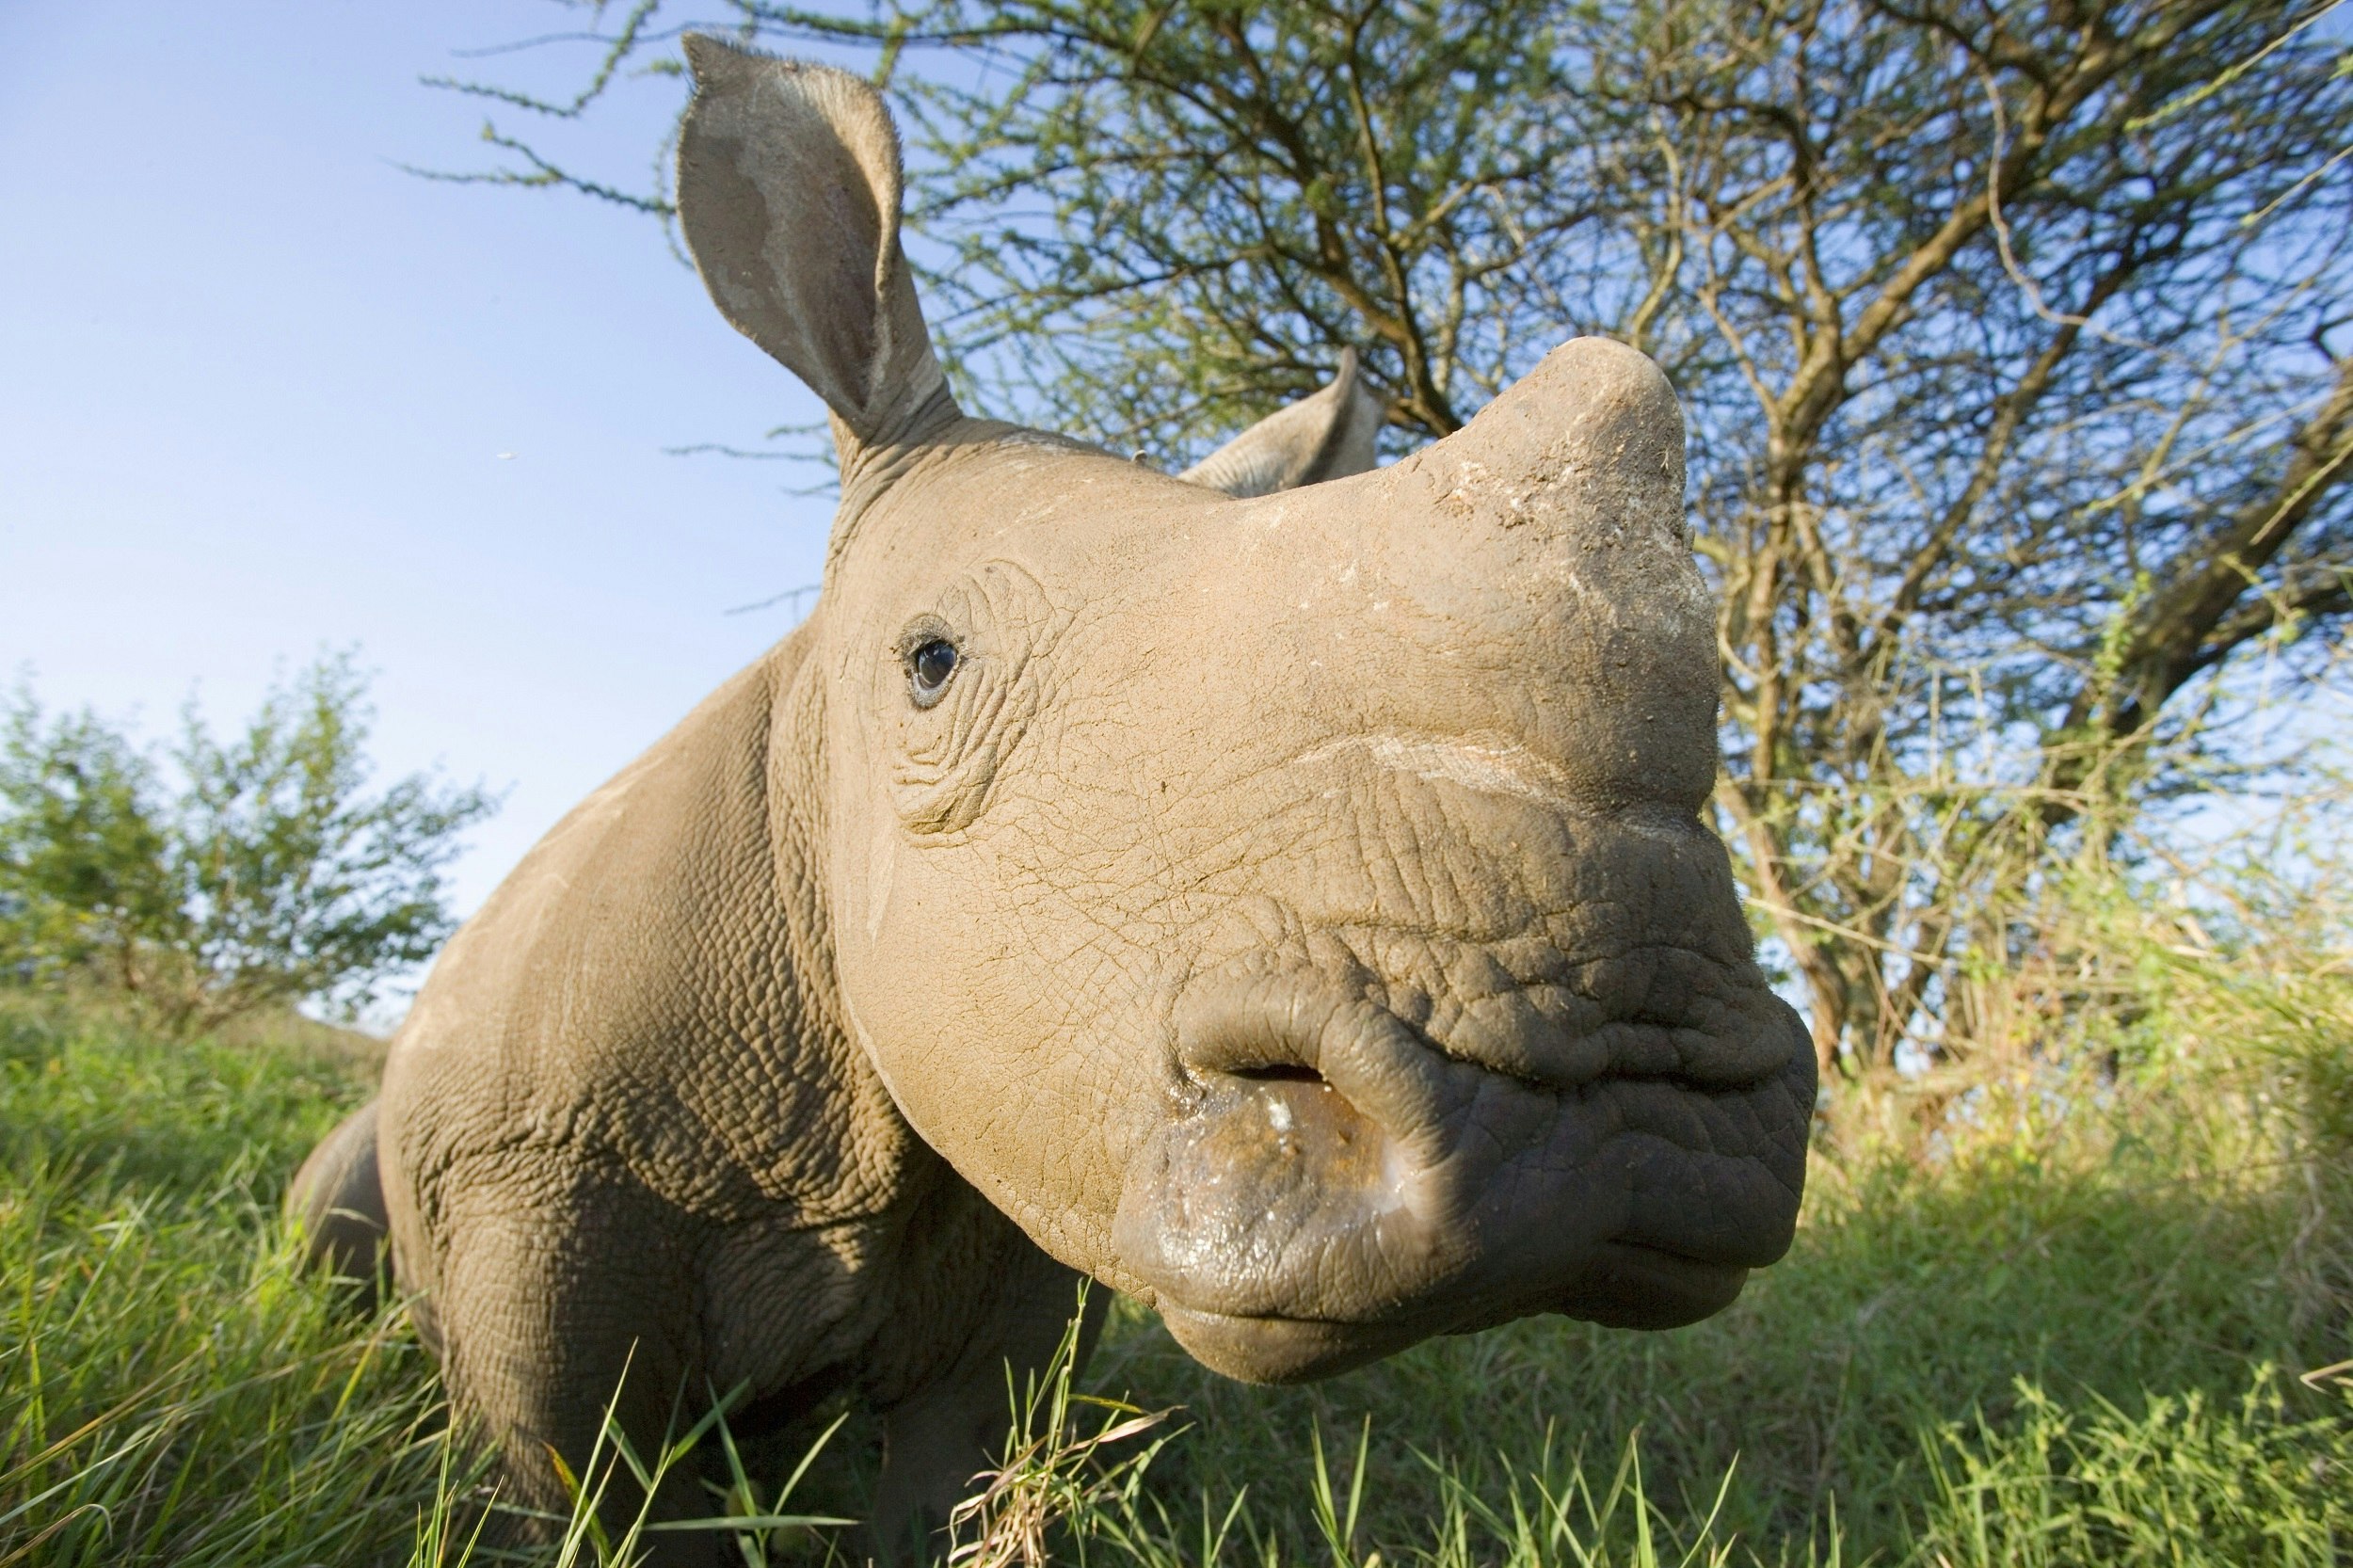 A baby white rhino, with a short stump of a horn, pokes its nose into the camera.